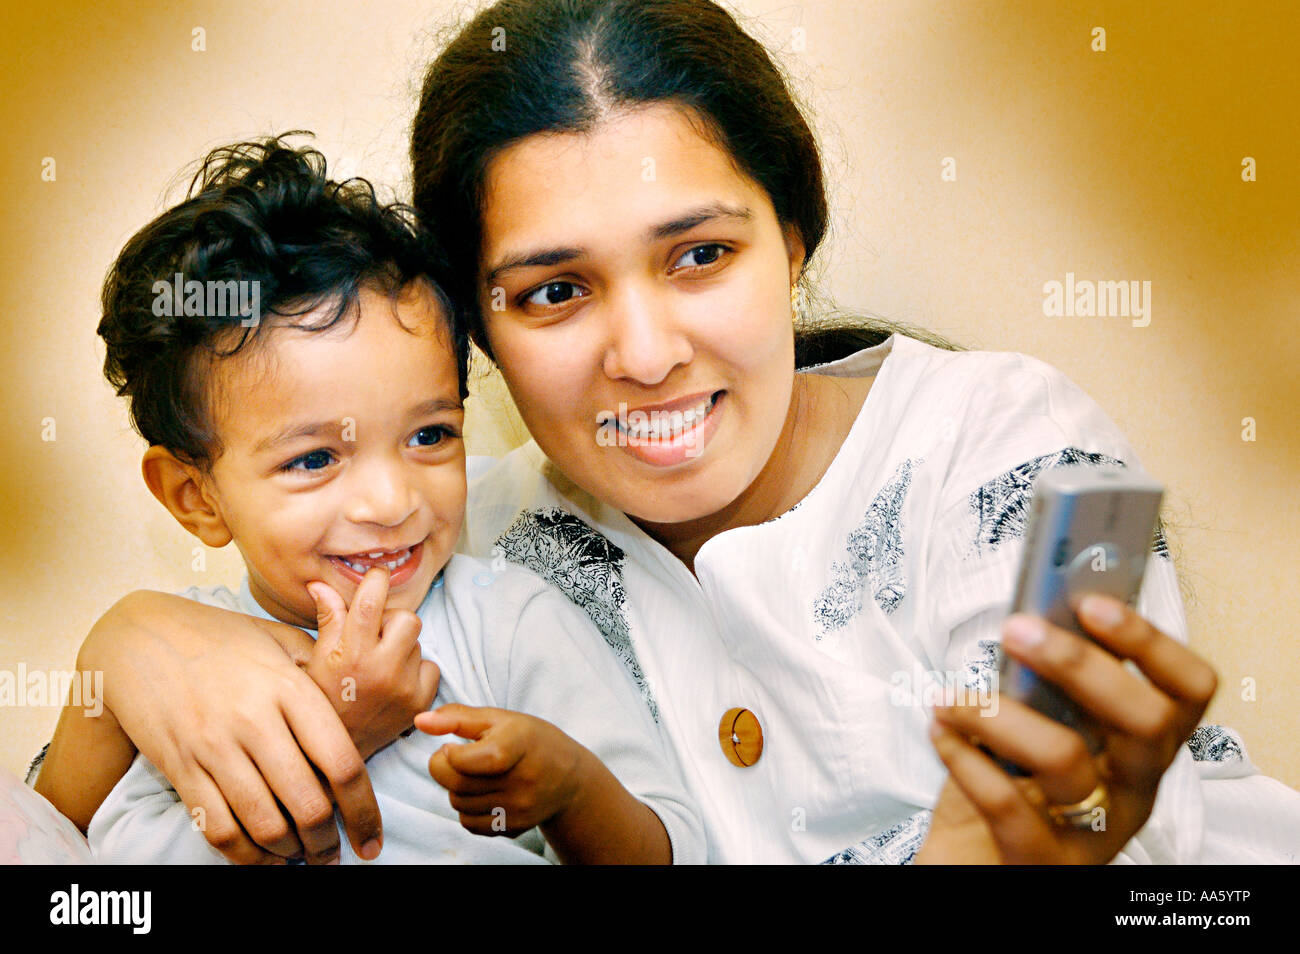 Indian mother and child watching images on mobile phone, Model Release#468 Stock Photo